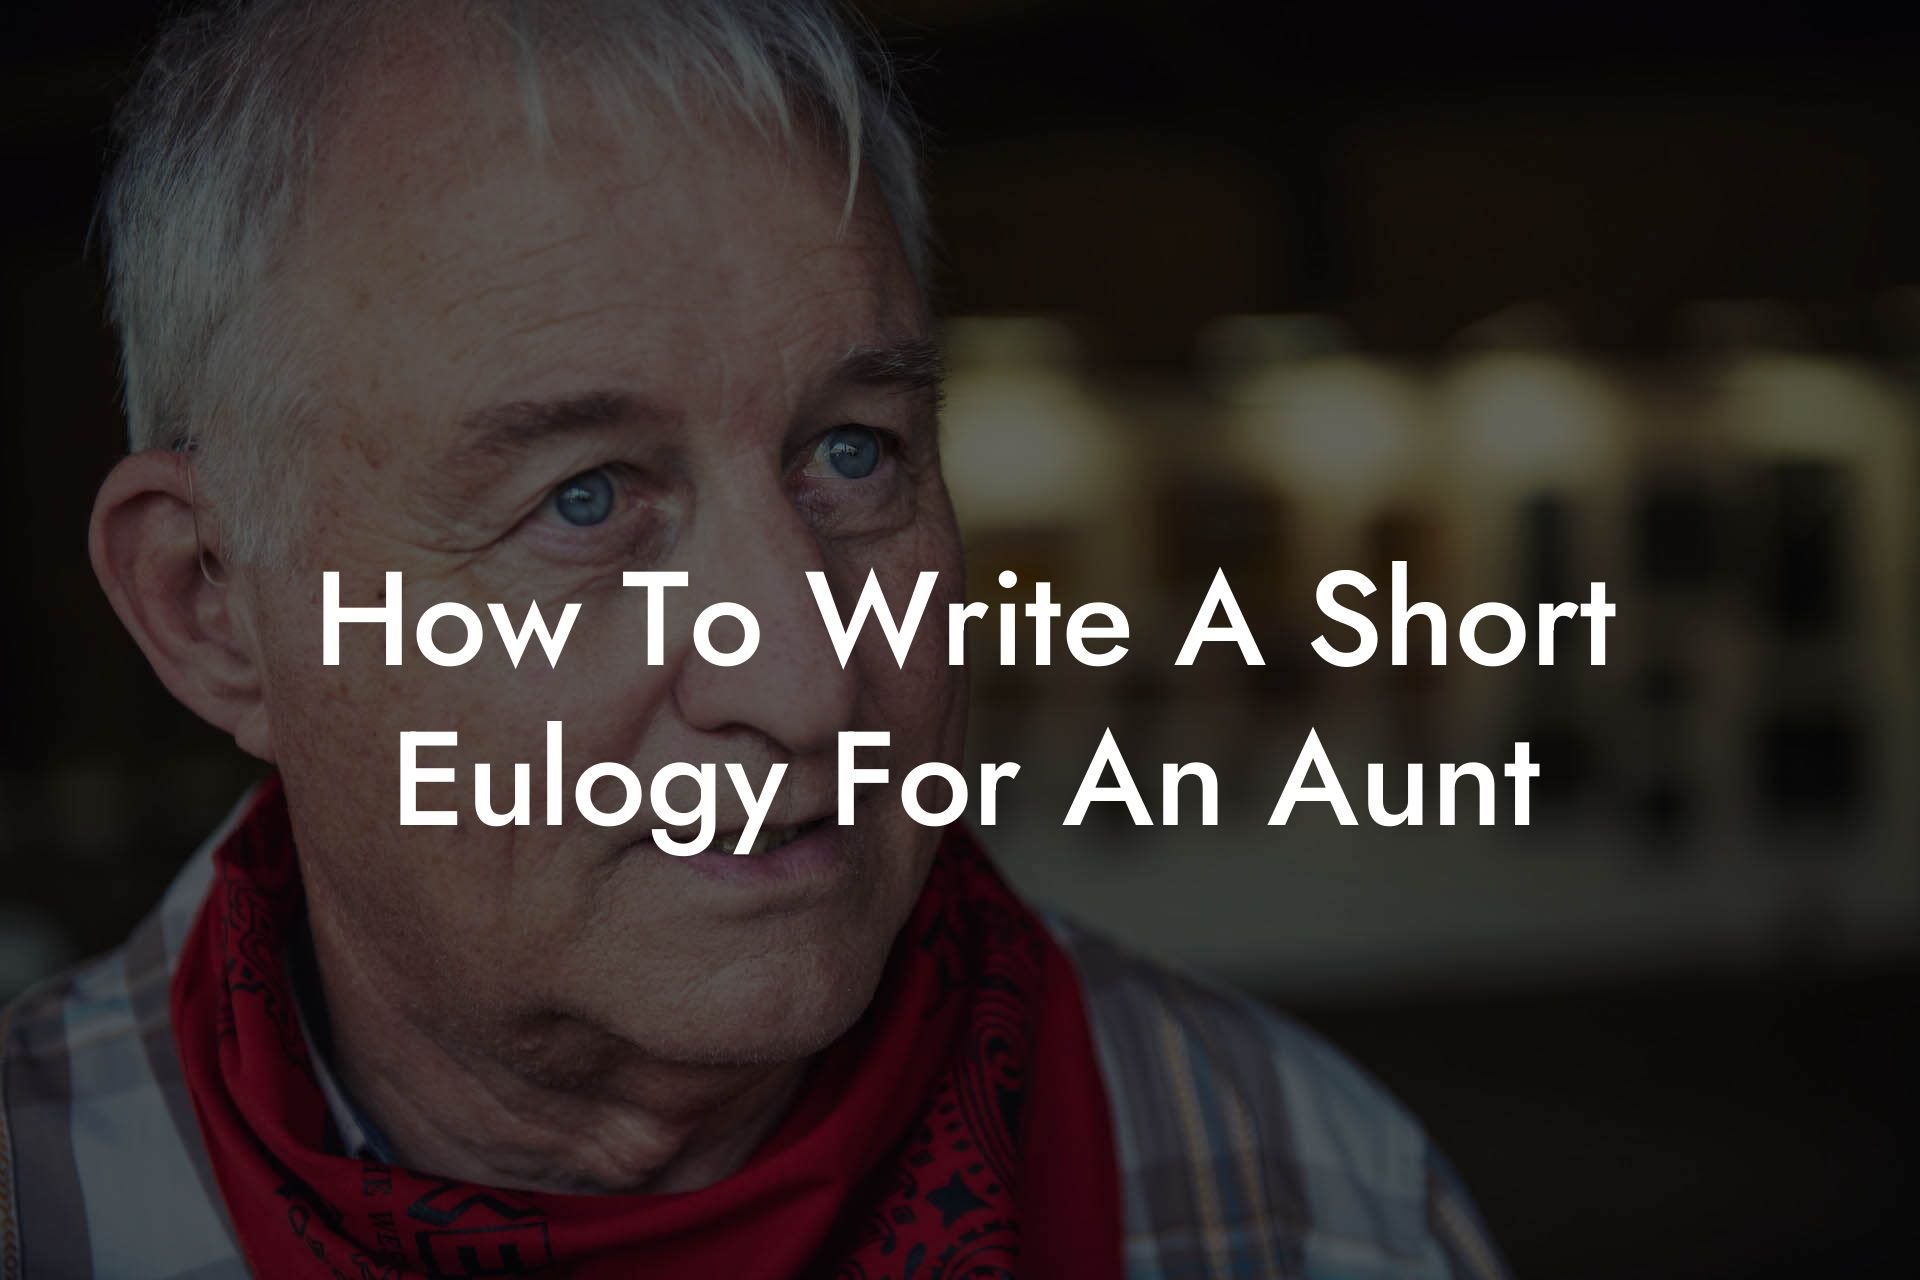 How To Write A Short Eulogy For An Aunt